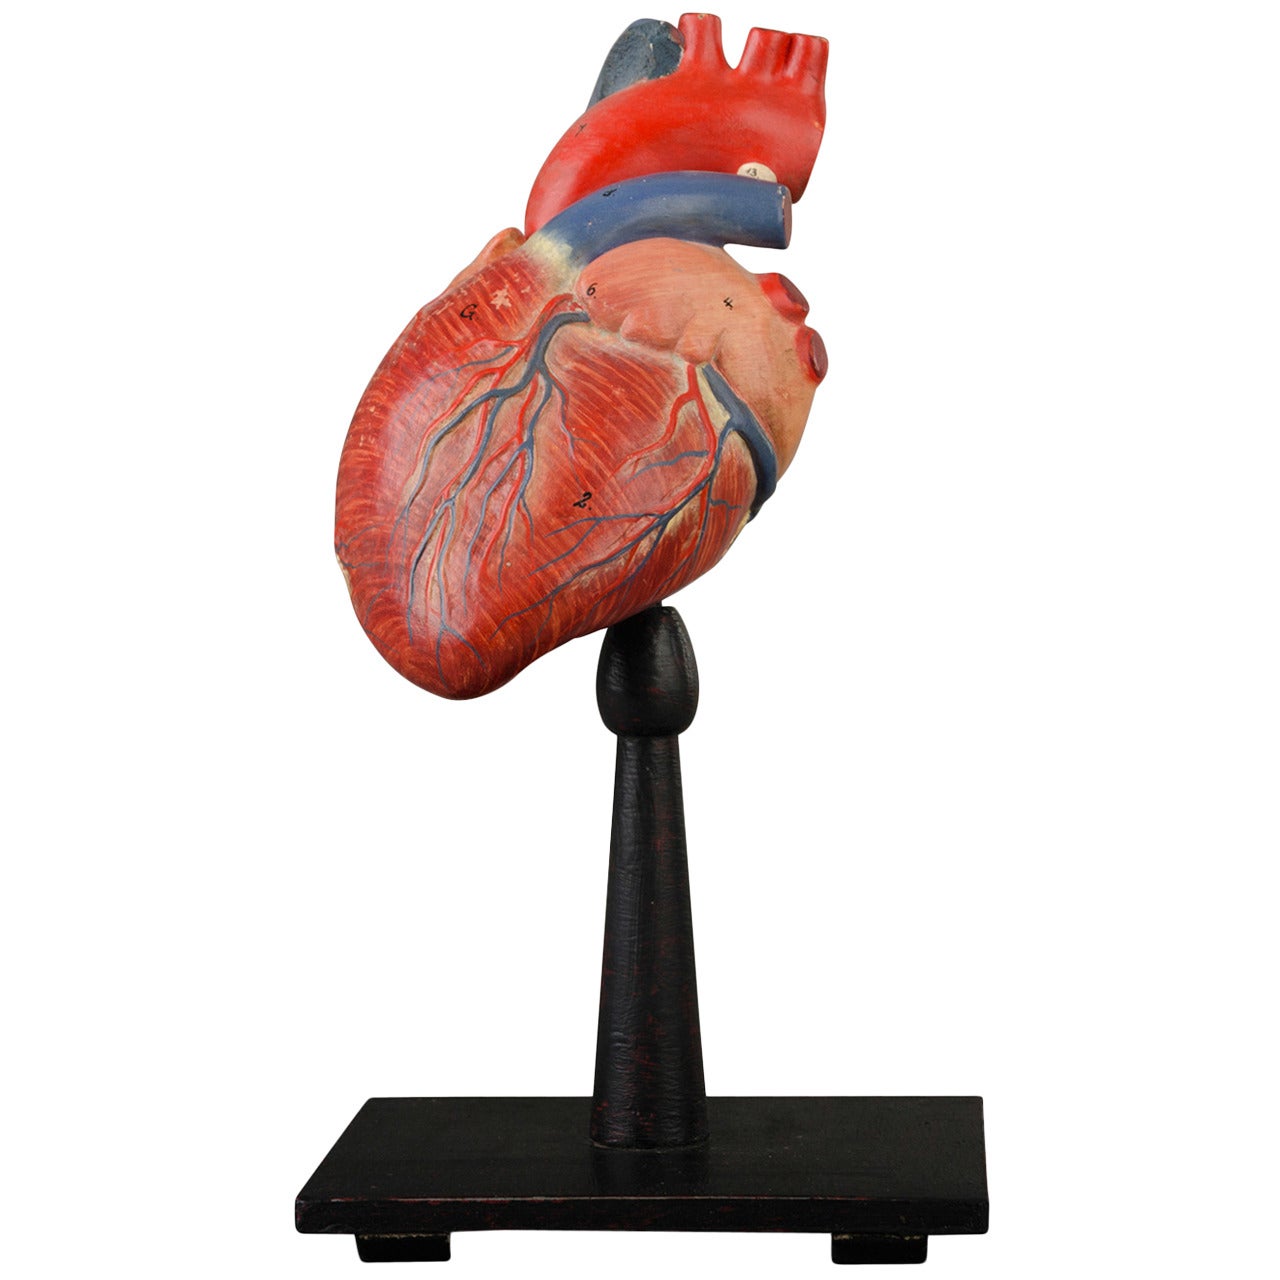 Anatomical Model of the Human Heart